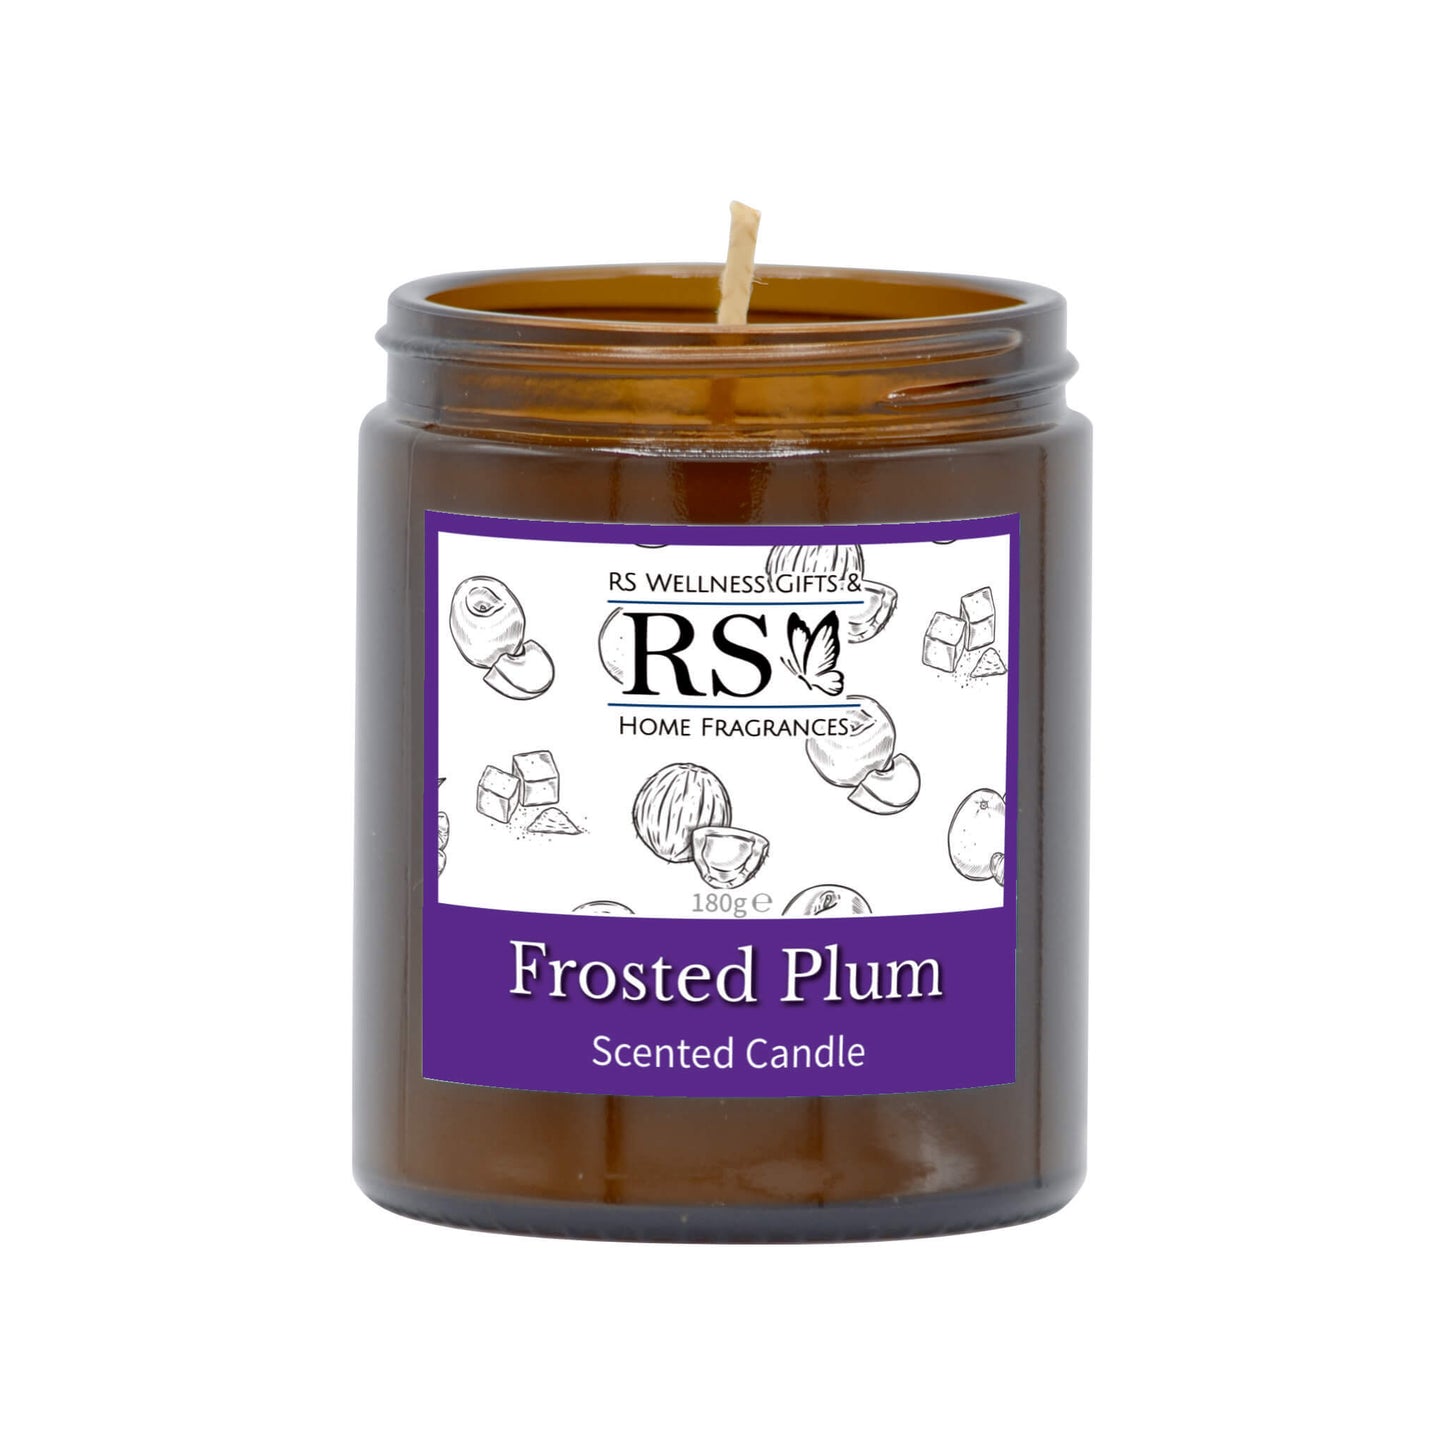 Frosted Plum Candle 180g